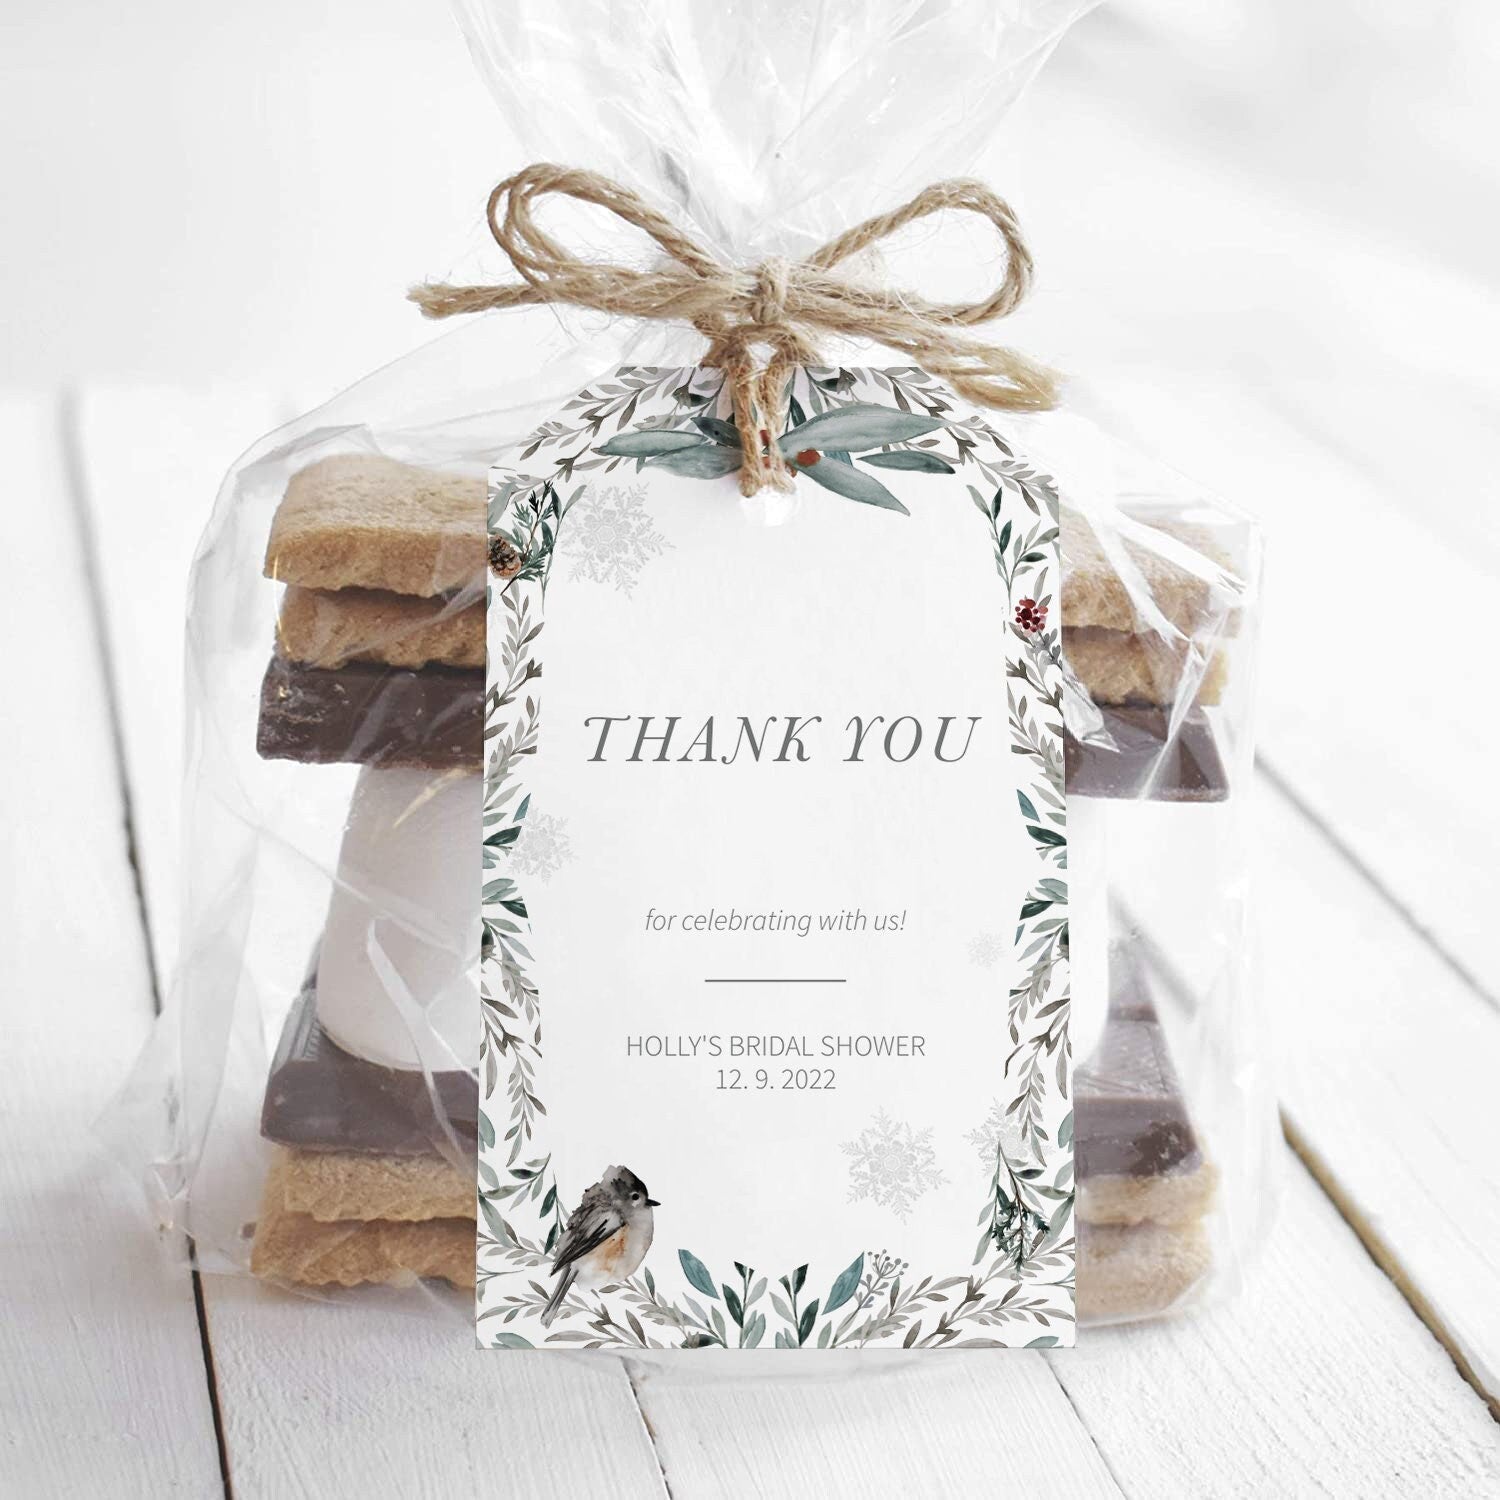 Winter Bridal Shower Favor Tags Template, Winter Woodland Bridal Shower, Bridal Shower Thank You Tag Printable, INSTANT DOWNLOAD FB100